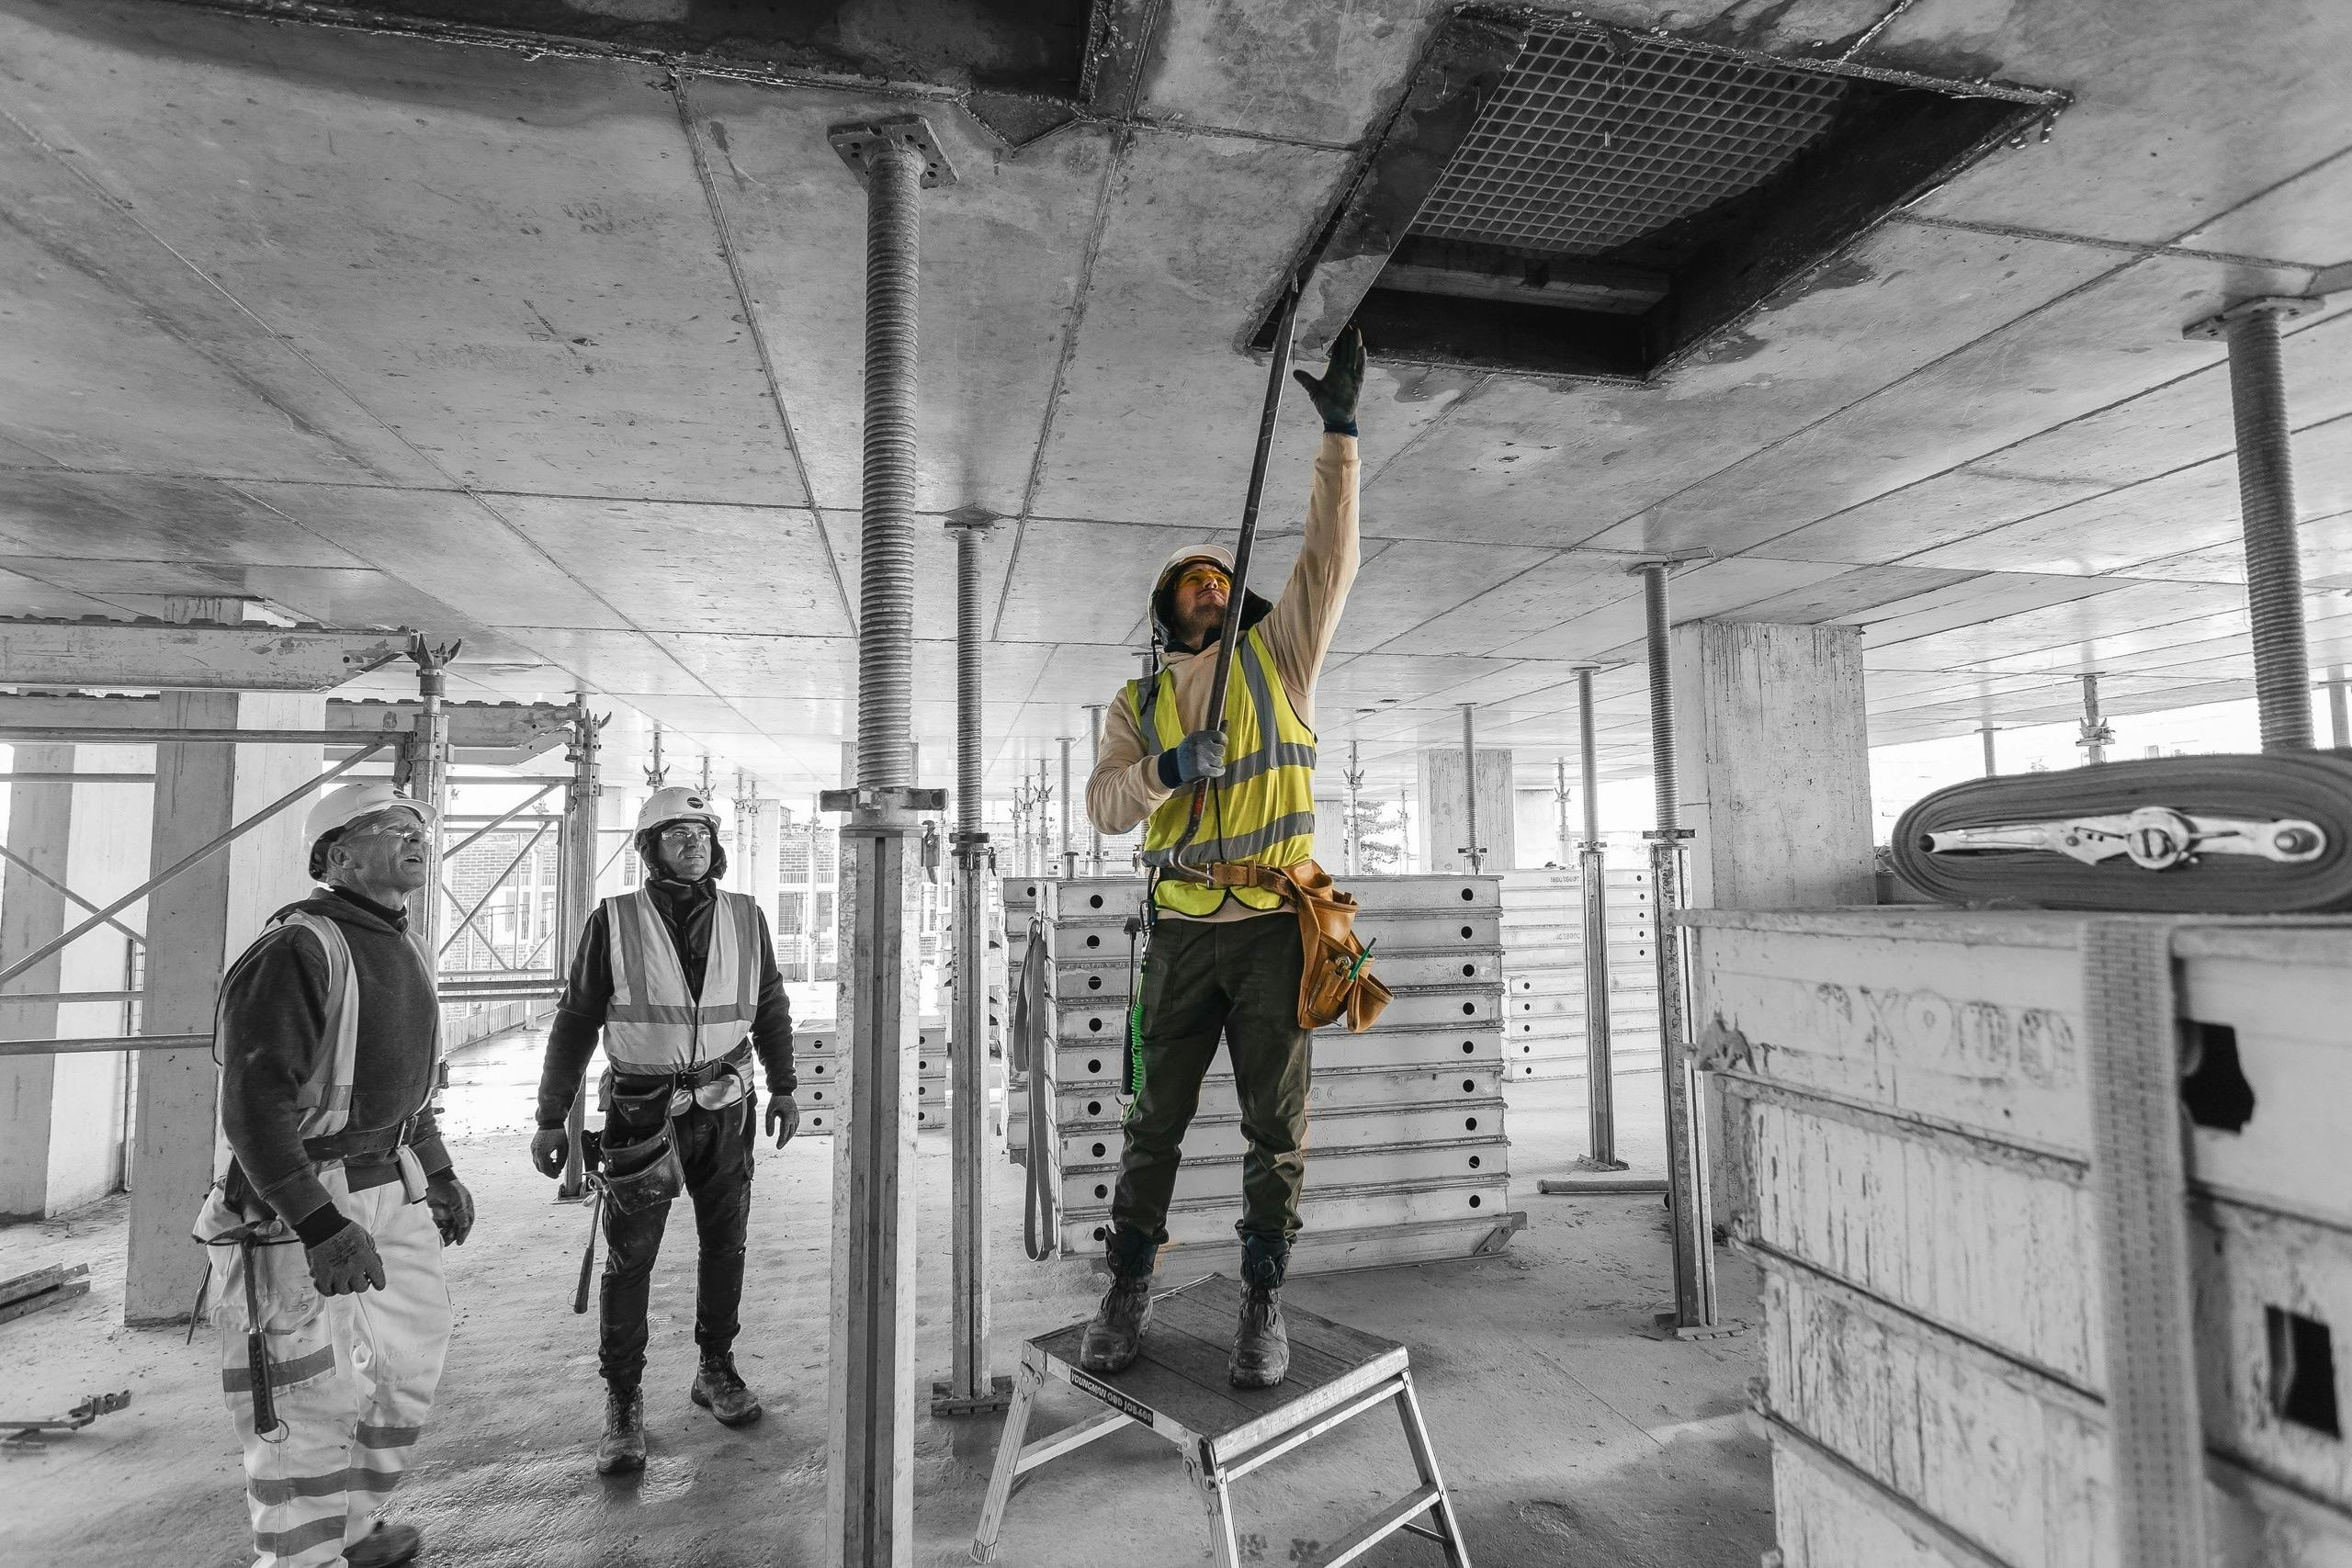 Two male construction workers on partially complete construction site watching a third worker remove a piece of wood from a concrete ceiling using a crowbar